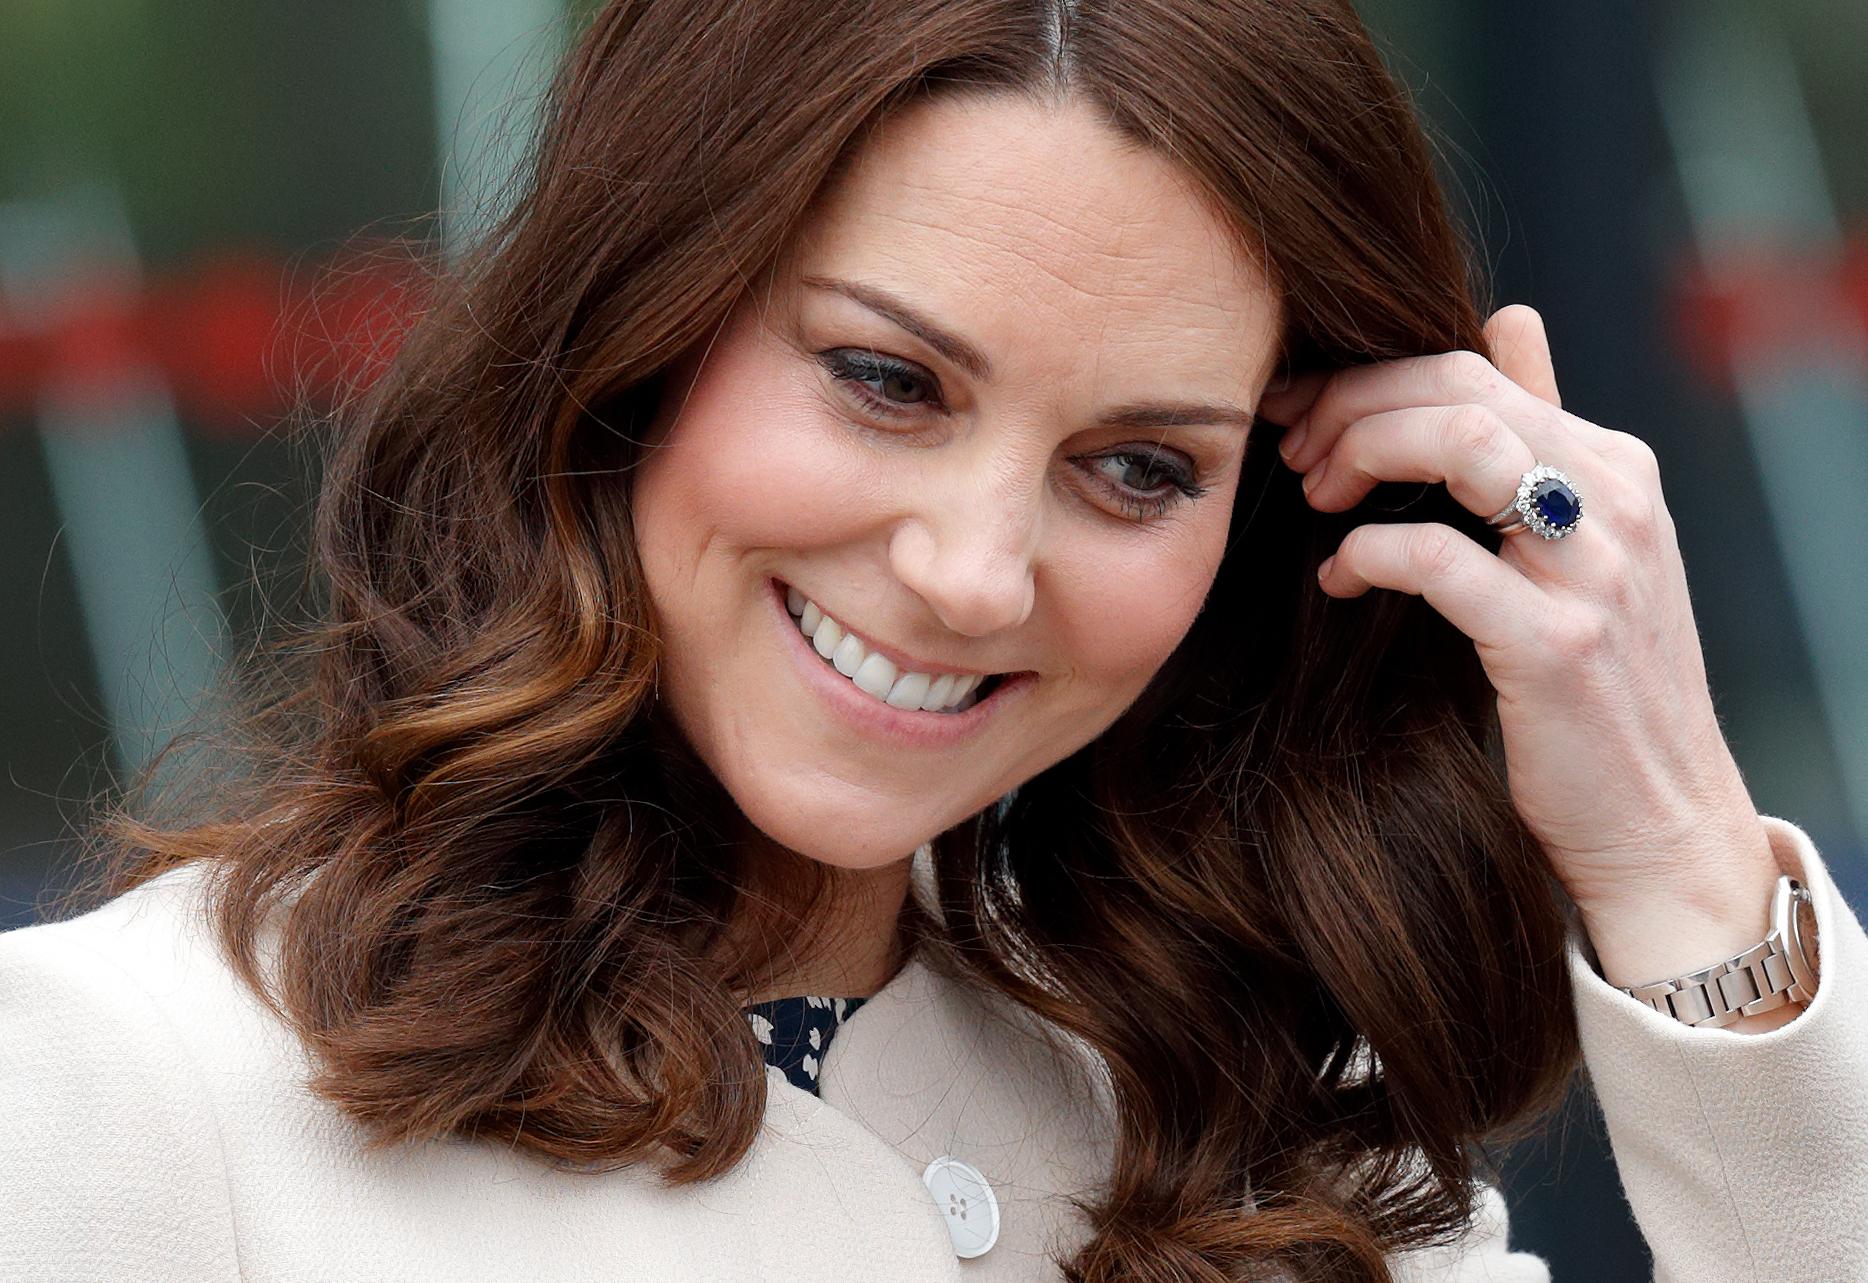 Who Wore Kate Middleton's Ring First? The History Behind the Ring